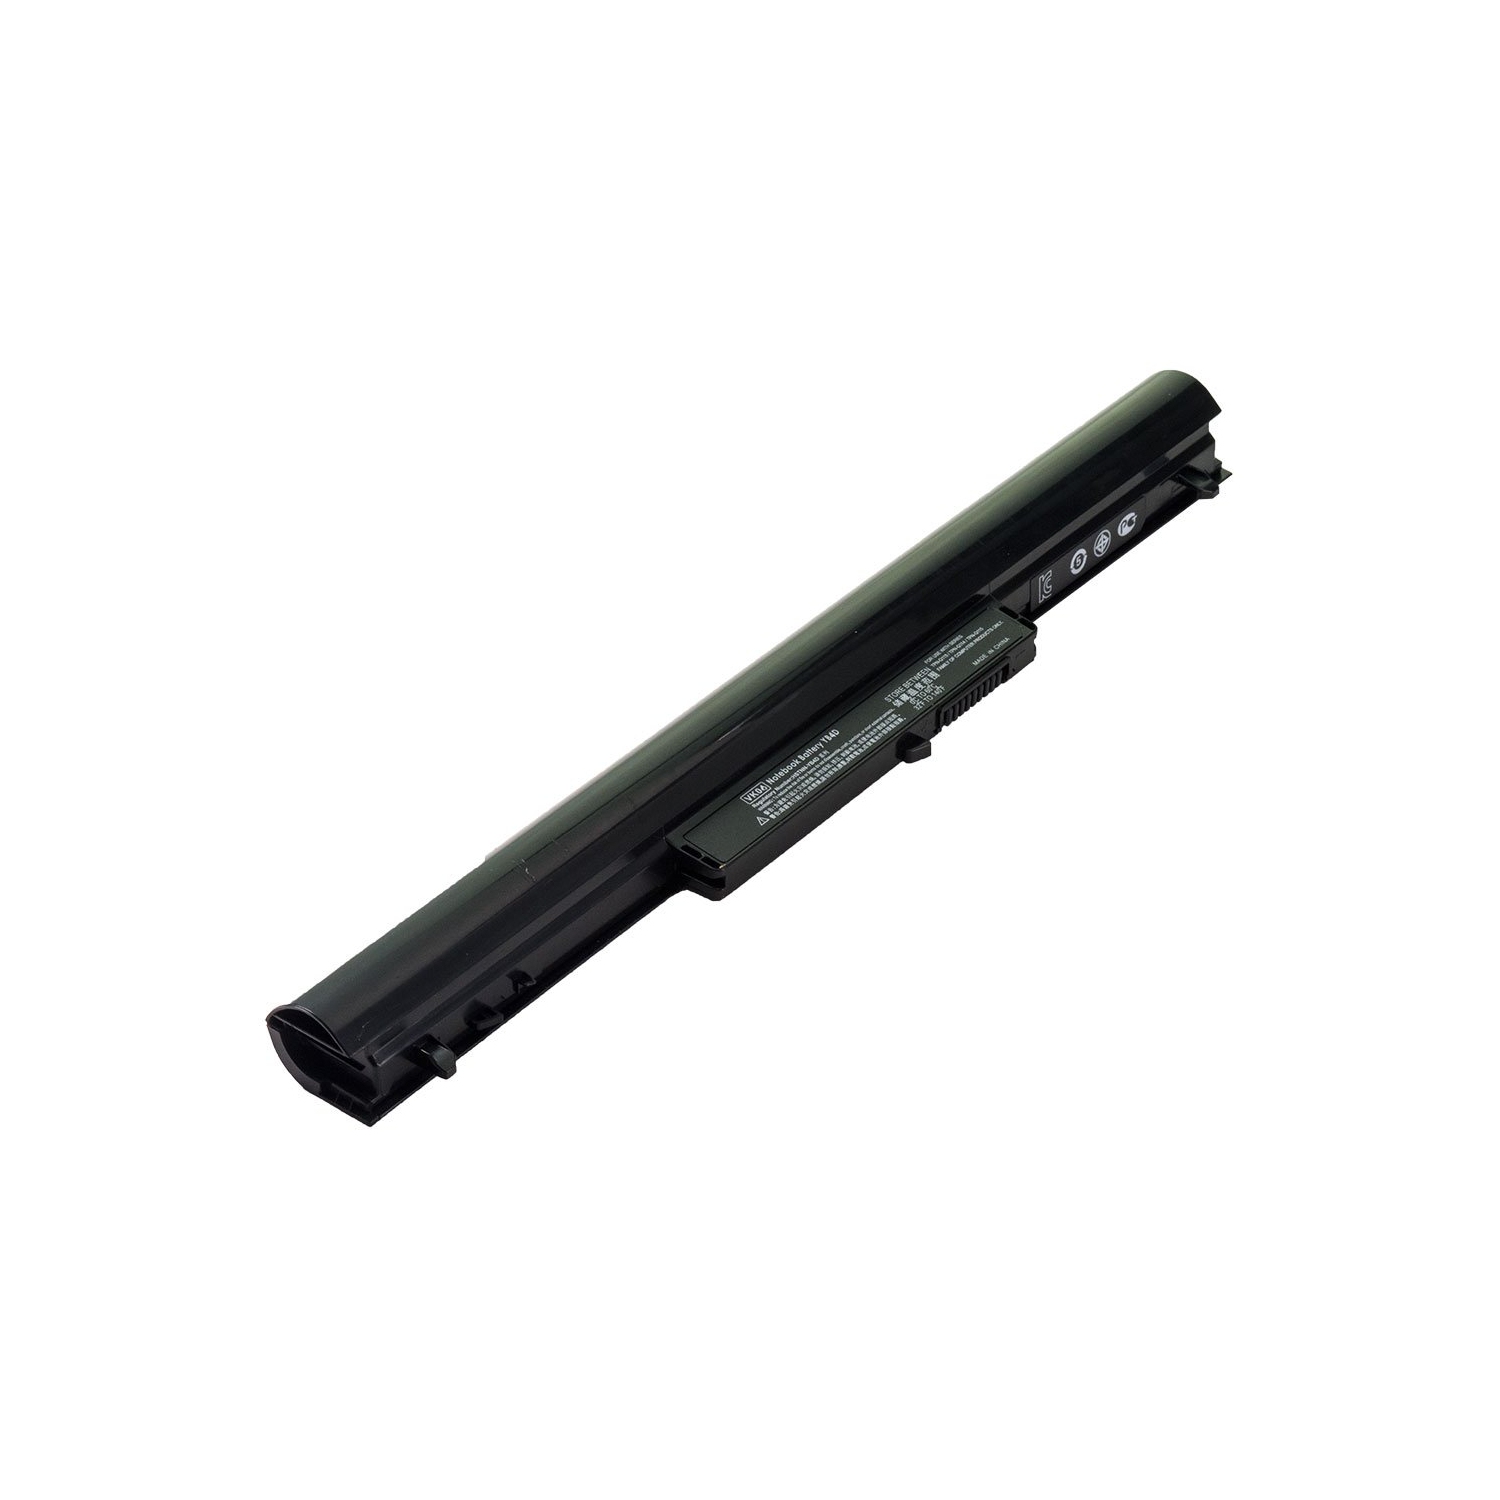 Laptop Battery Replacement for HP Pavilion Sleekbook 15t-b100 CTO, 695192-001, H4Q45AA#ABB, HSTNN-YB4D, TPN-Q113, TPN-Q115